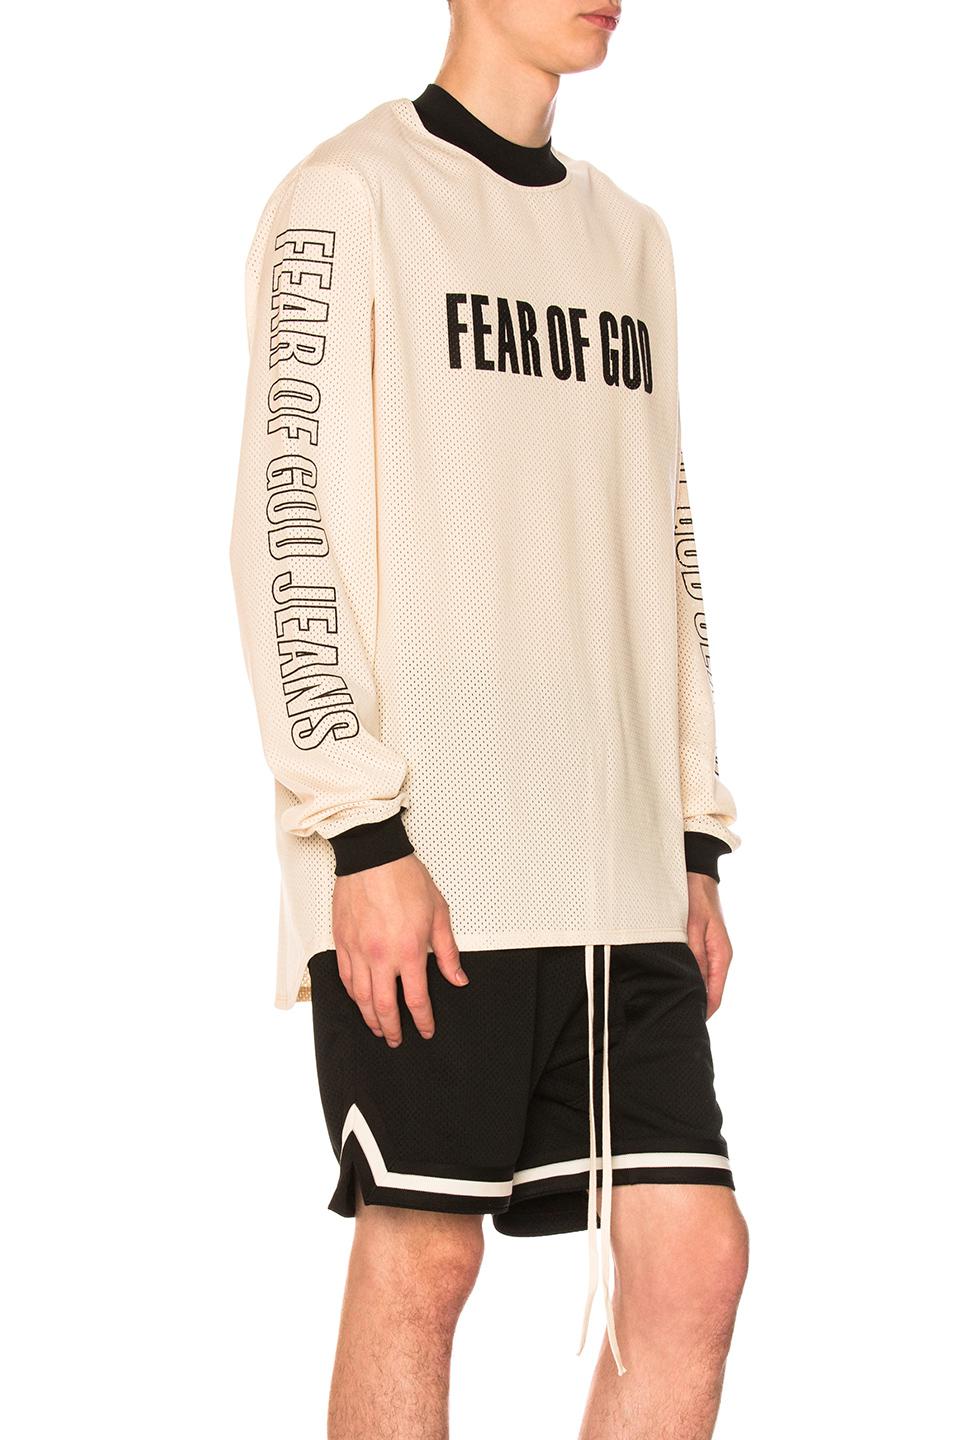 Fear Of God Mesh Motocross Jersey in Natural - Lyst